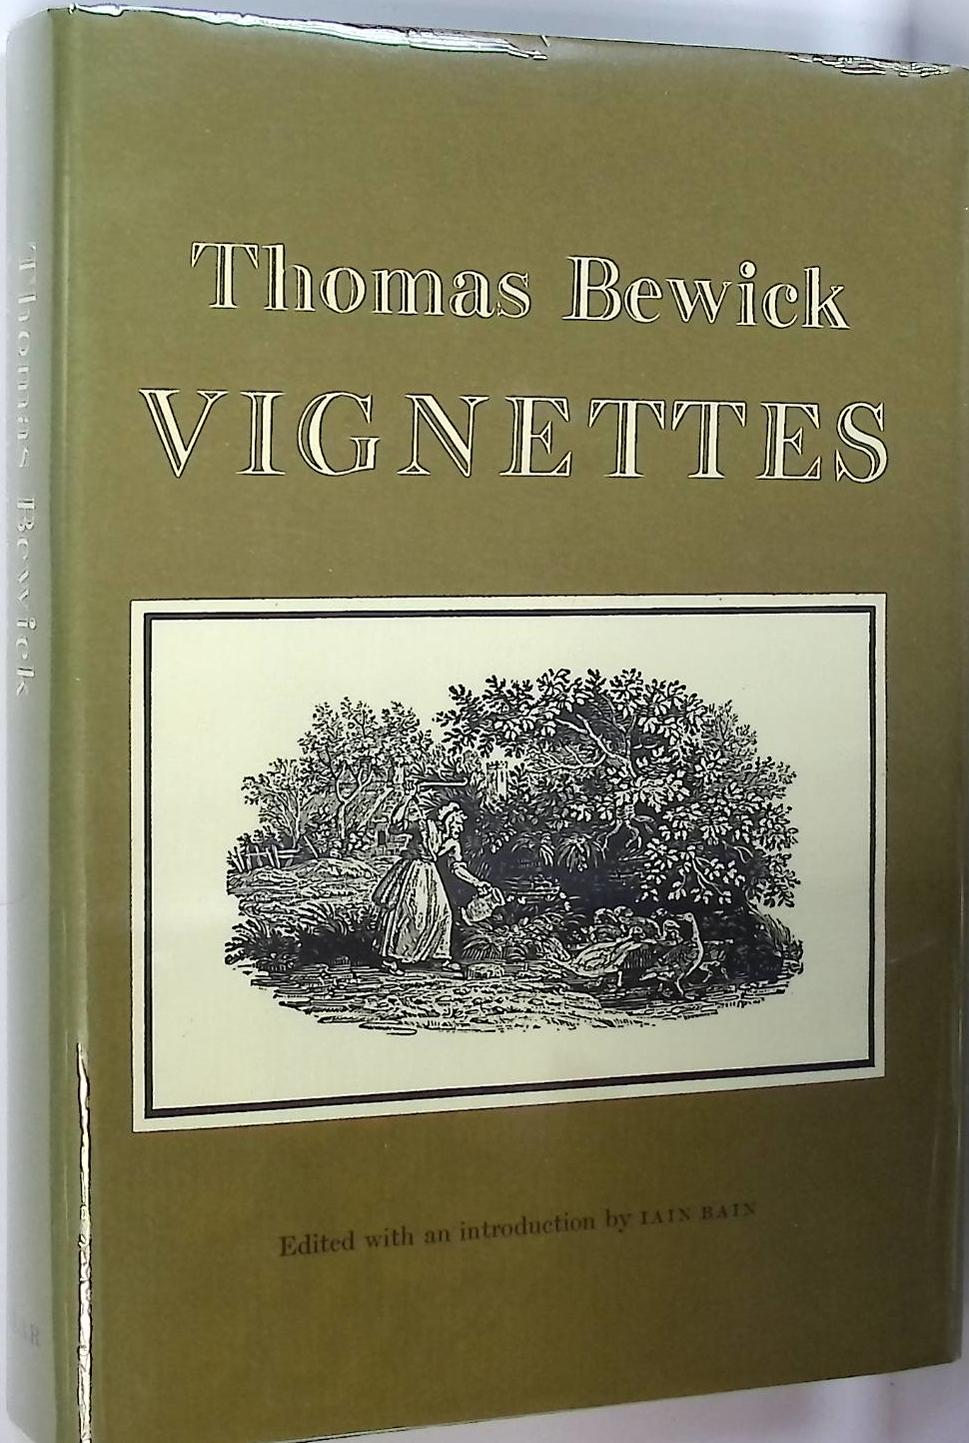 Thomas Bewick Vignettes. Being Tail pieces Engraved Principally for his General History of Quadrupeds & History of British Birds.